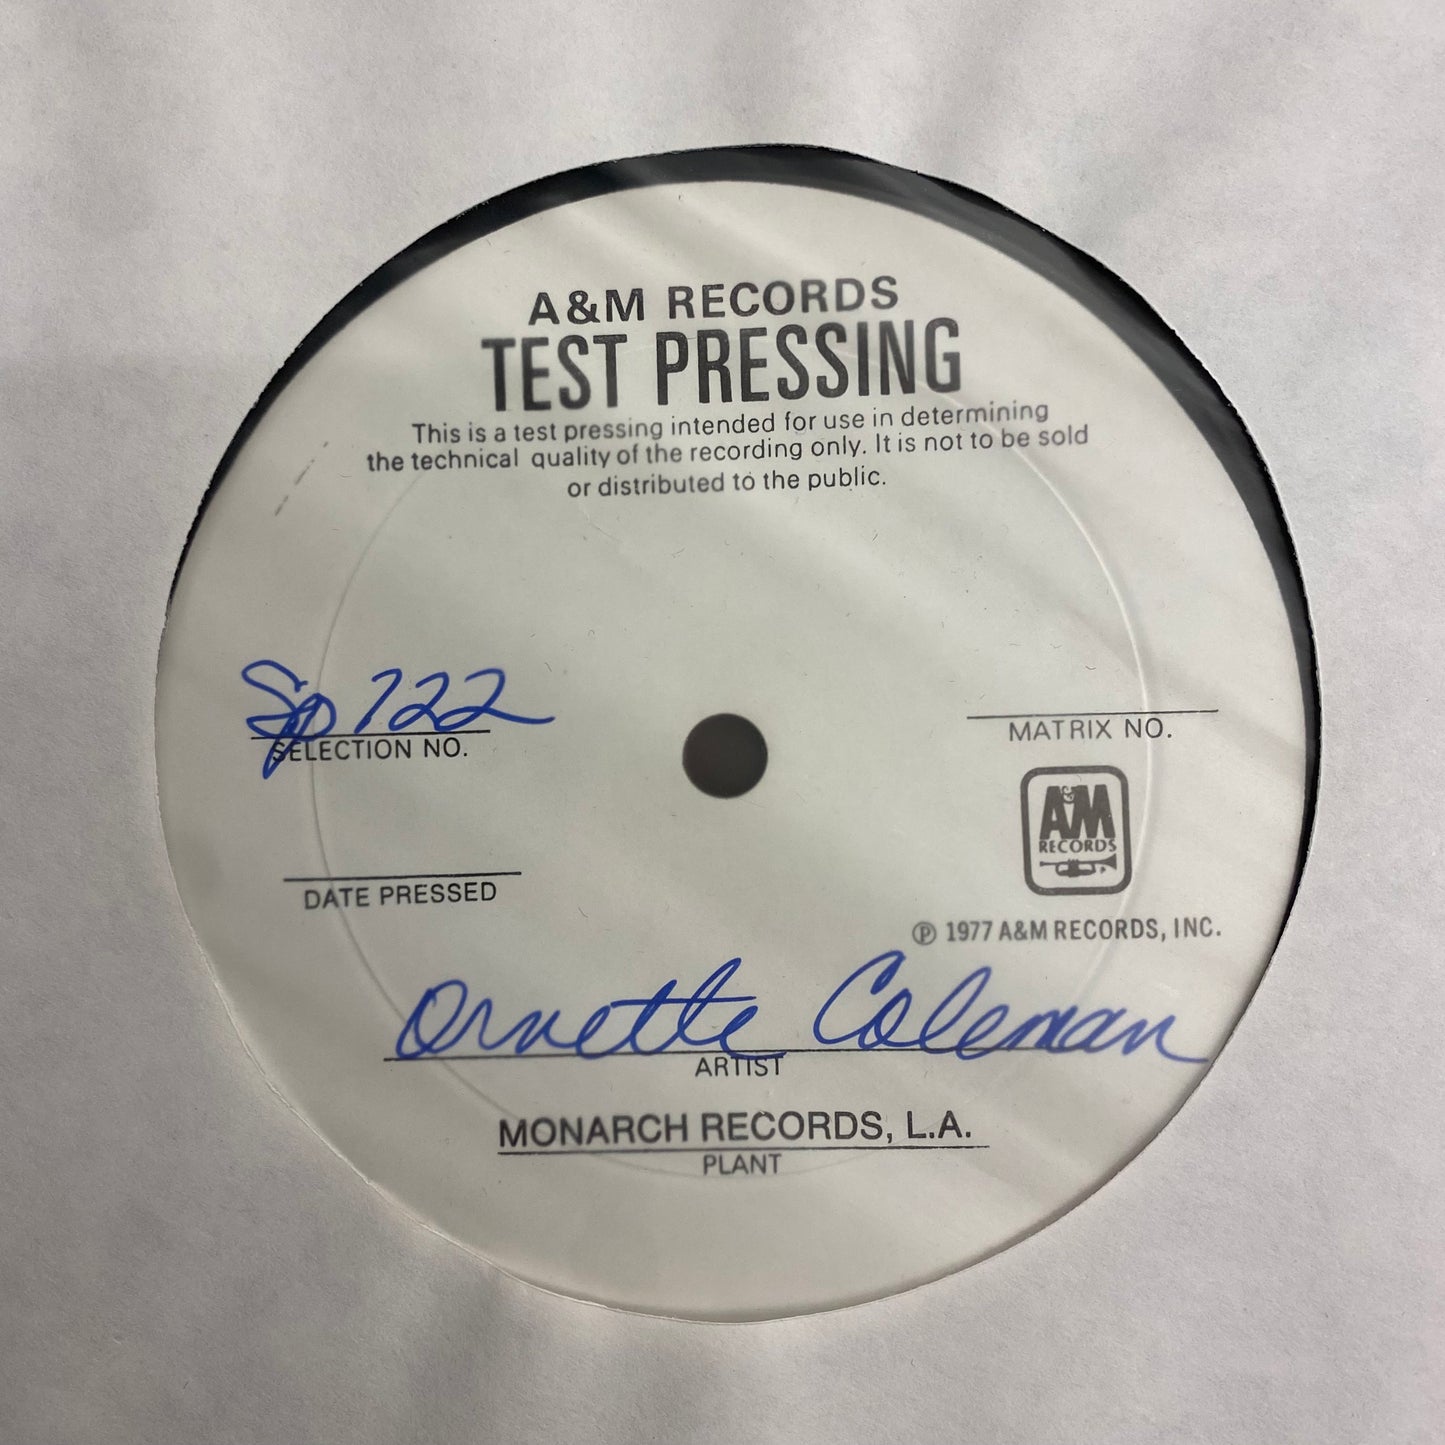 Ornette Coleman - Dancing In Your Head (Test Pressing) (Used LP)